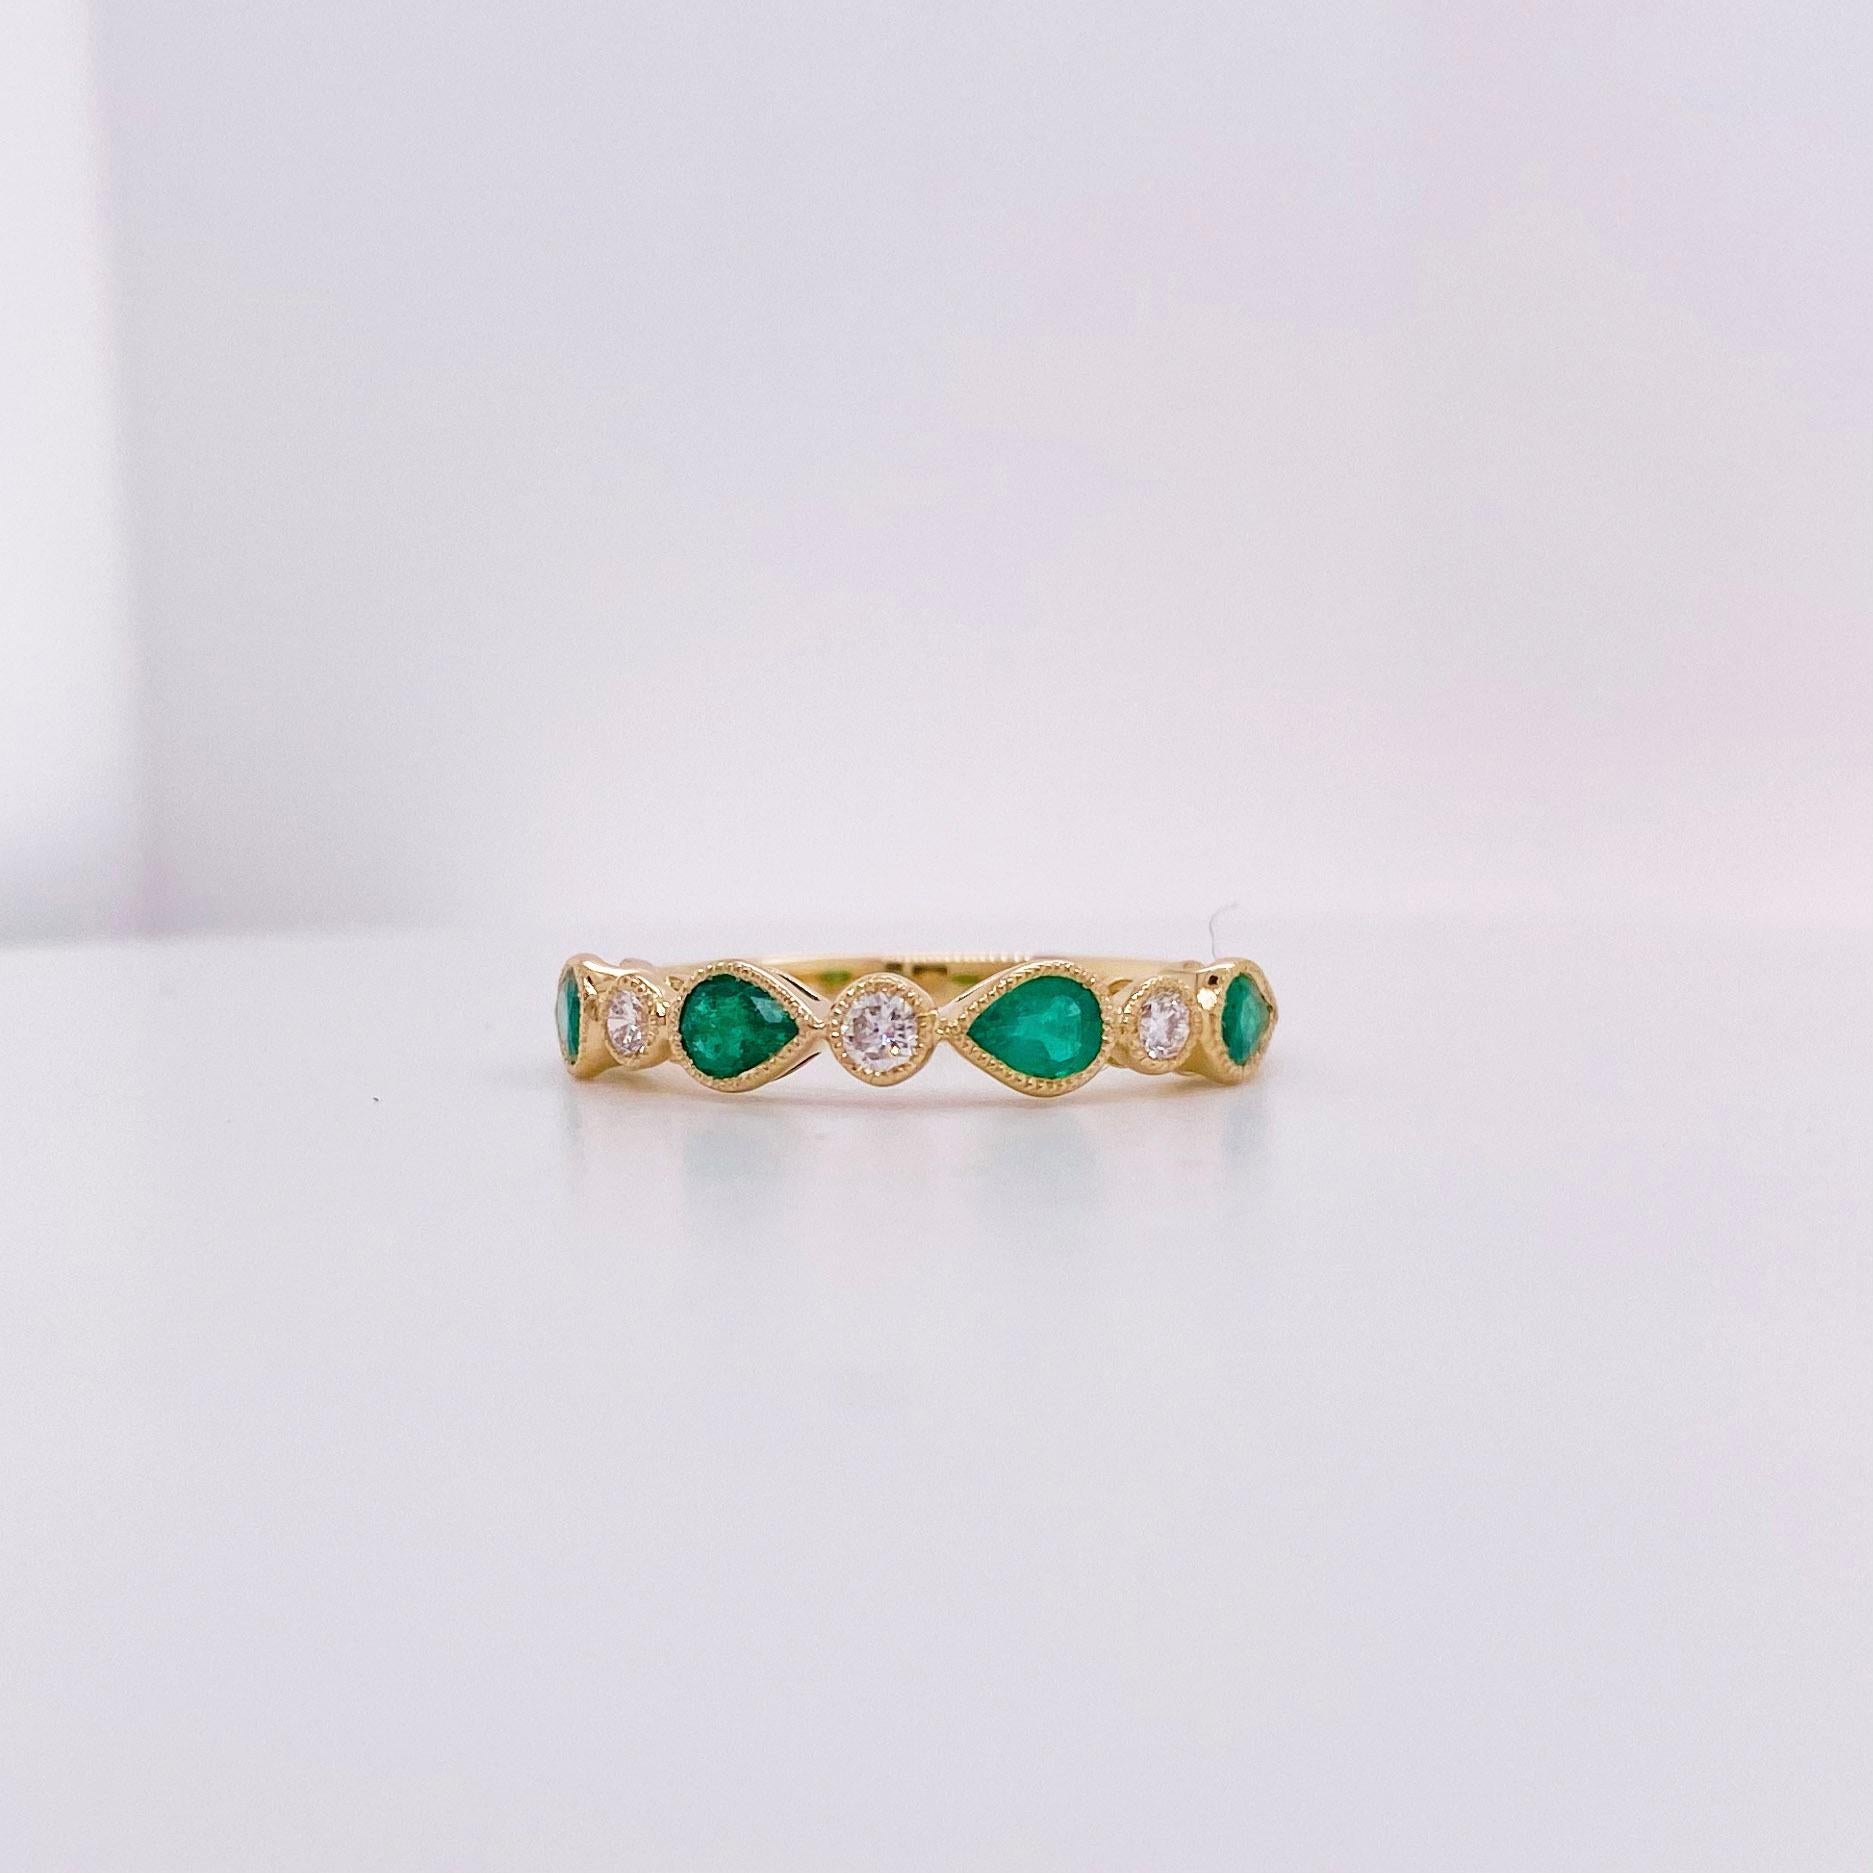 This gorgeous emerald and diamond band ring has four pear shaped emeralds and three round diamonds! There is a total of .70 carats of  natural genuine gemstones. The emeralds in this ring are so vibrrant and definitely of higher quality! The details